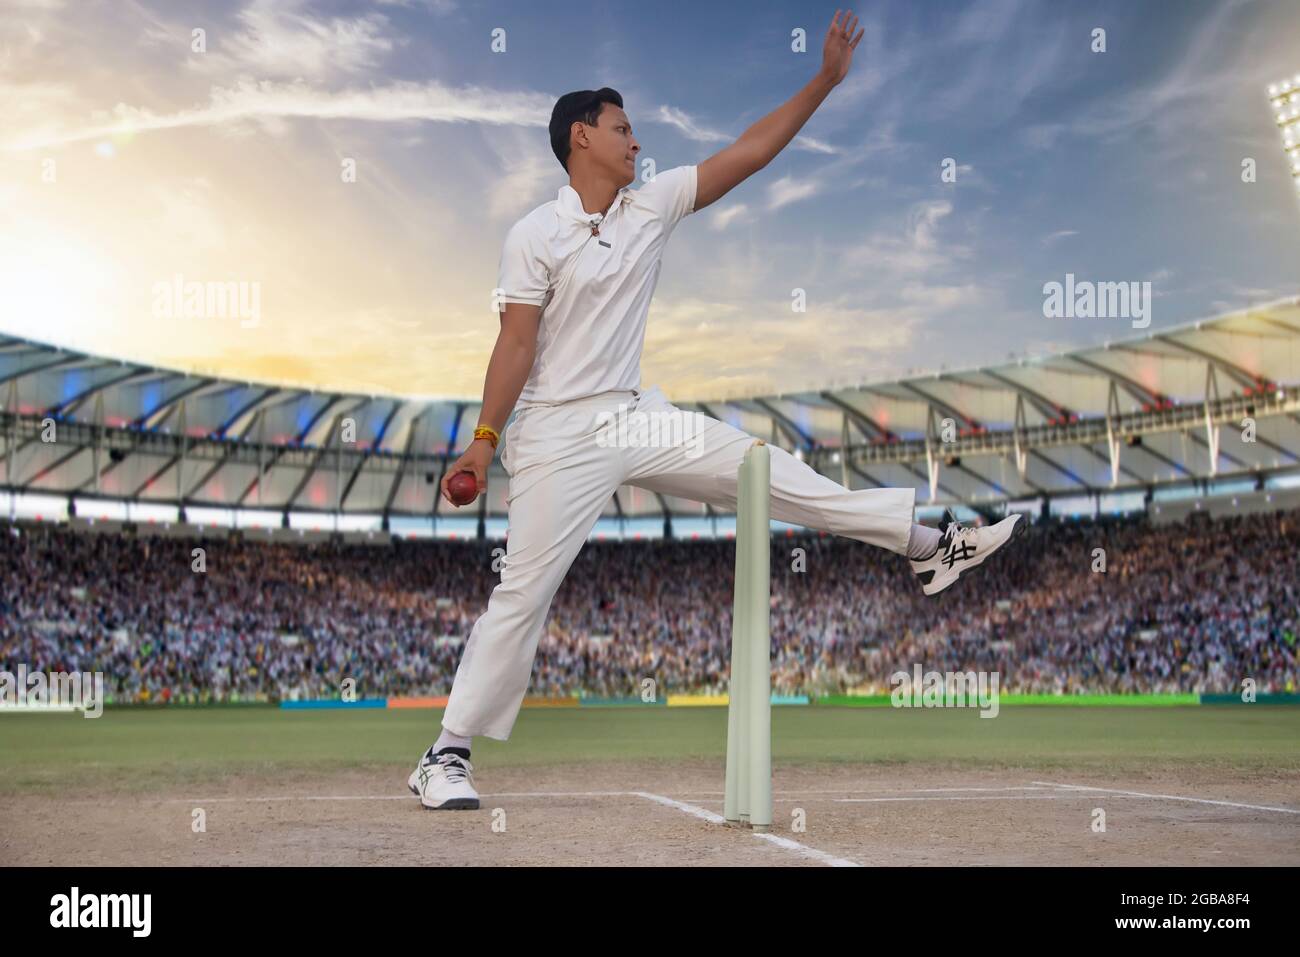 Cricketer, Bowler bowling during a match Stock Photo